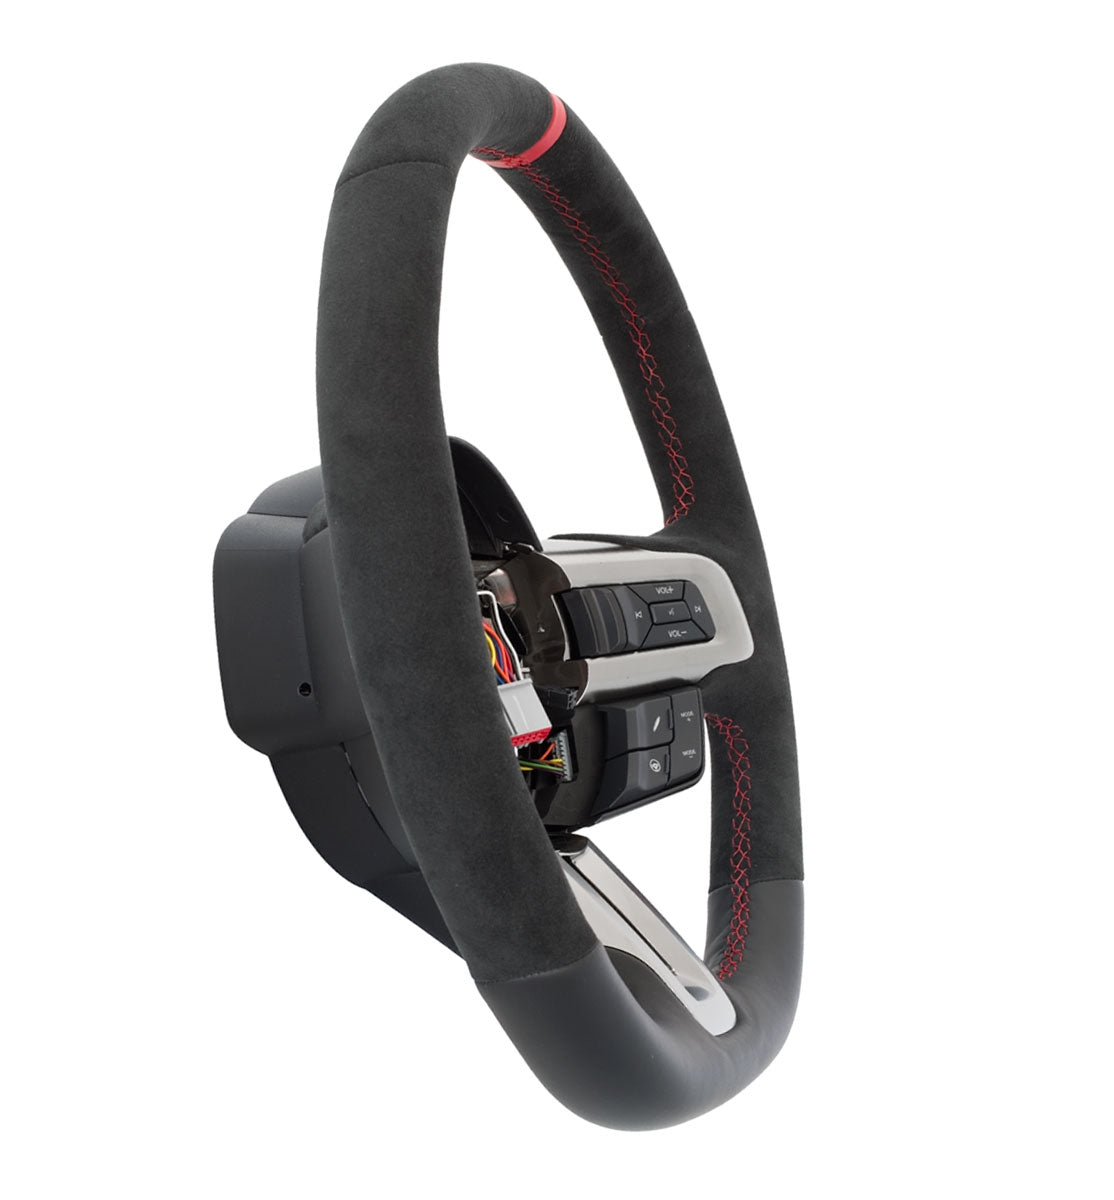 2018-2023 Ford Mustang Shelby GT350R Steering Wheel w/ Red Stitching & Sightline